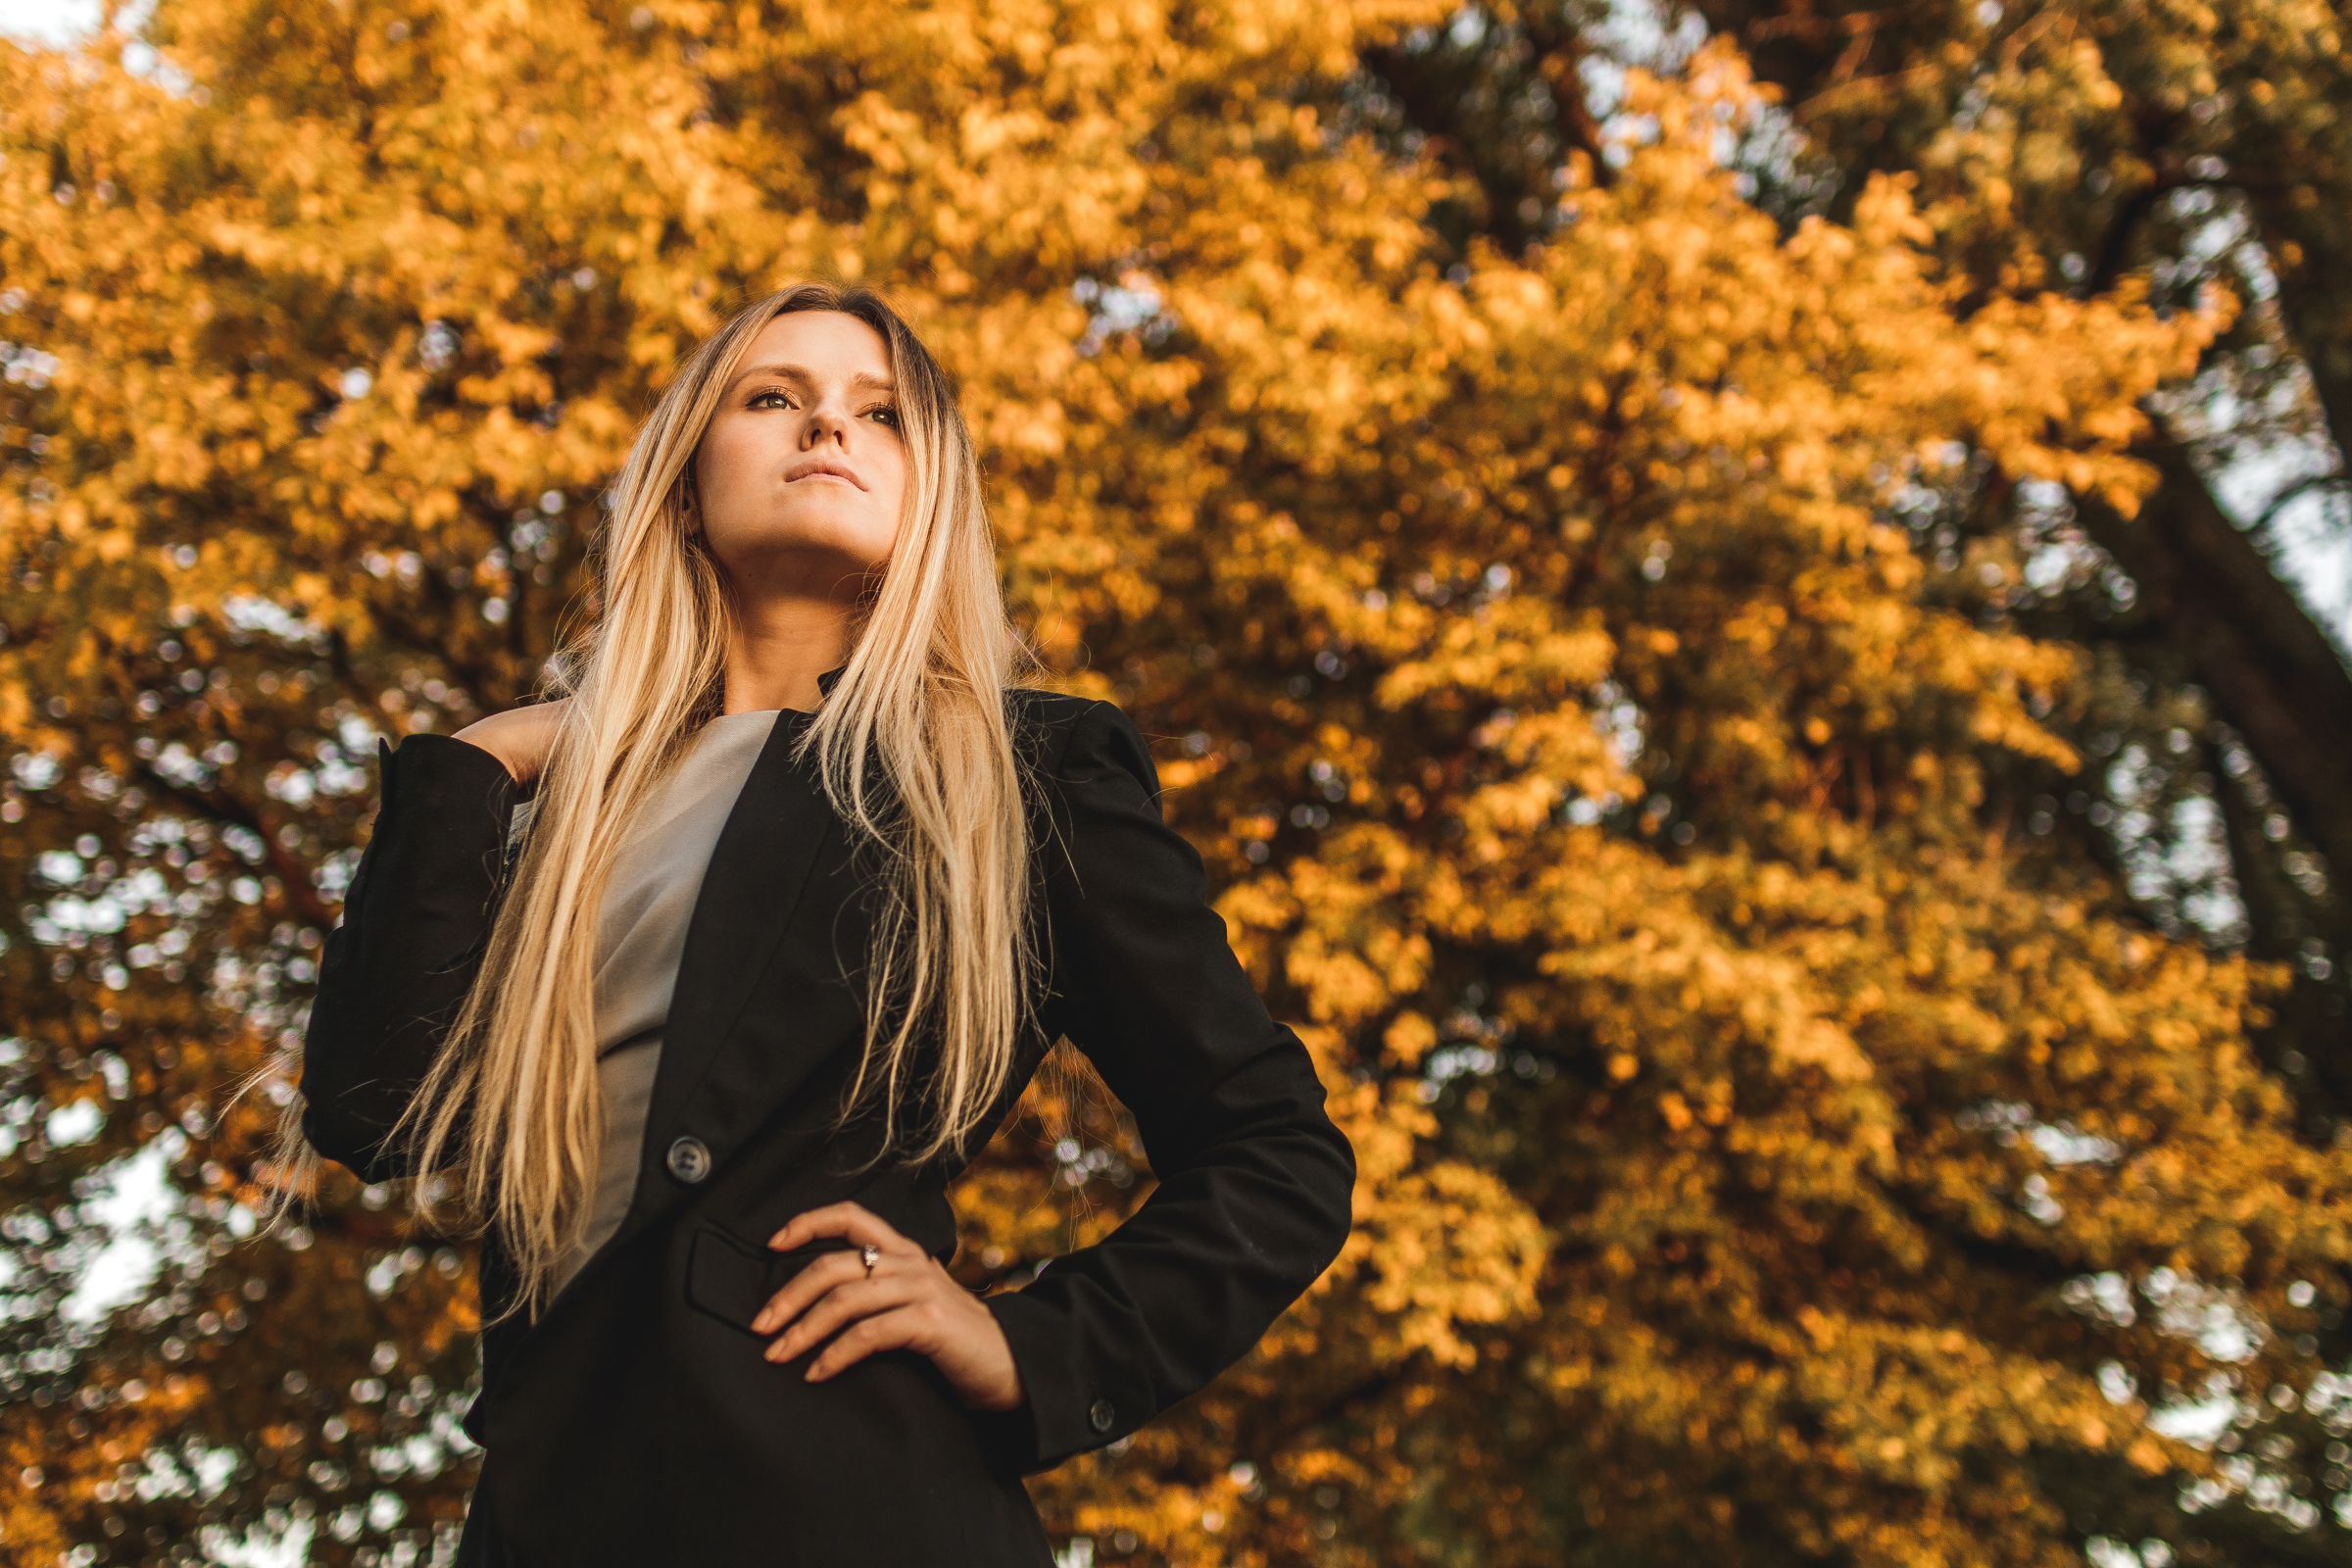 A blonde woman standing in front of a tree with yellow leaves in autumn.